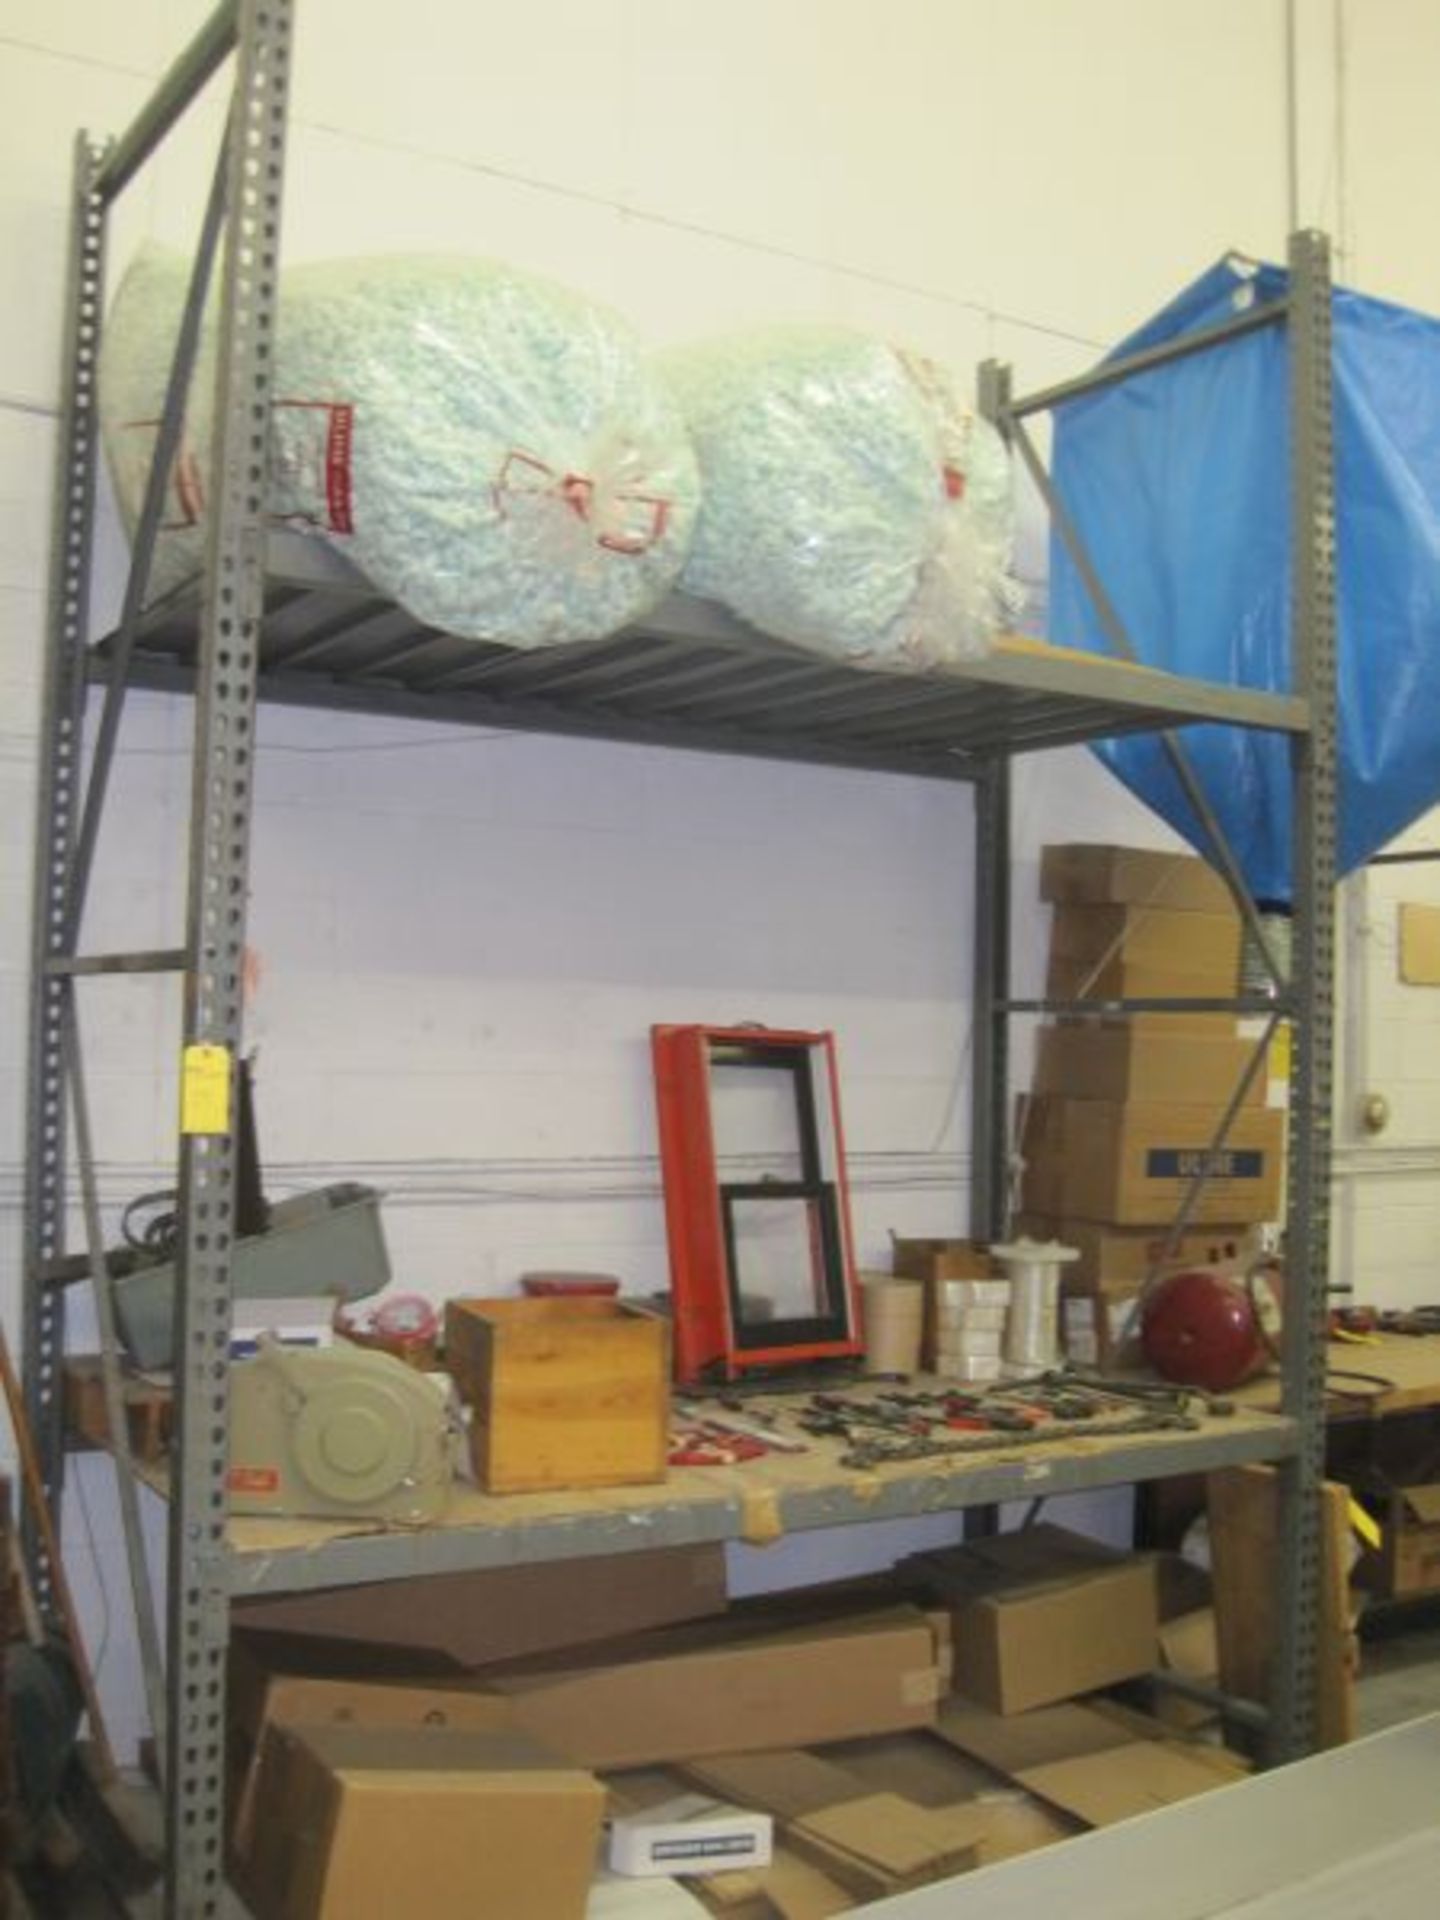 Pallet Racking, (1-Section), 8'x4' (Not The Contents)